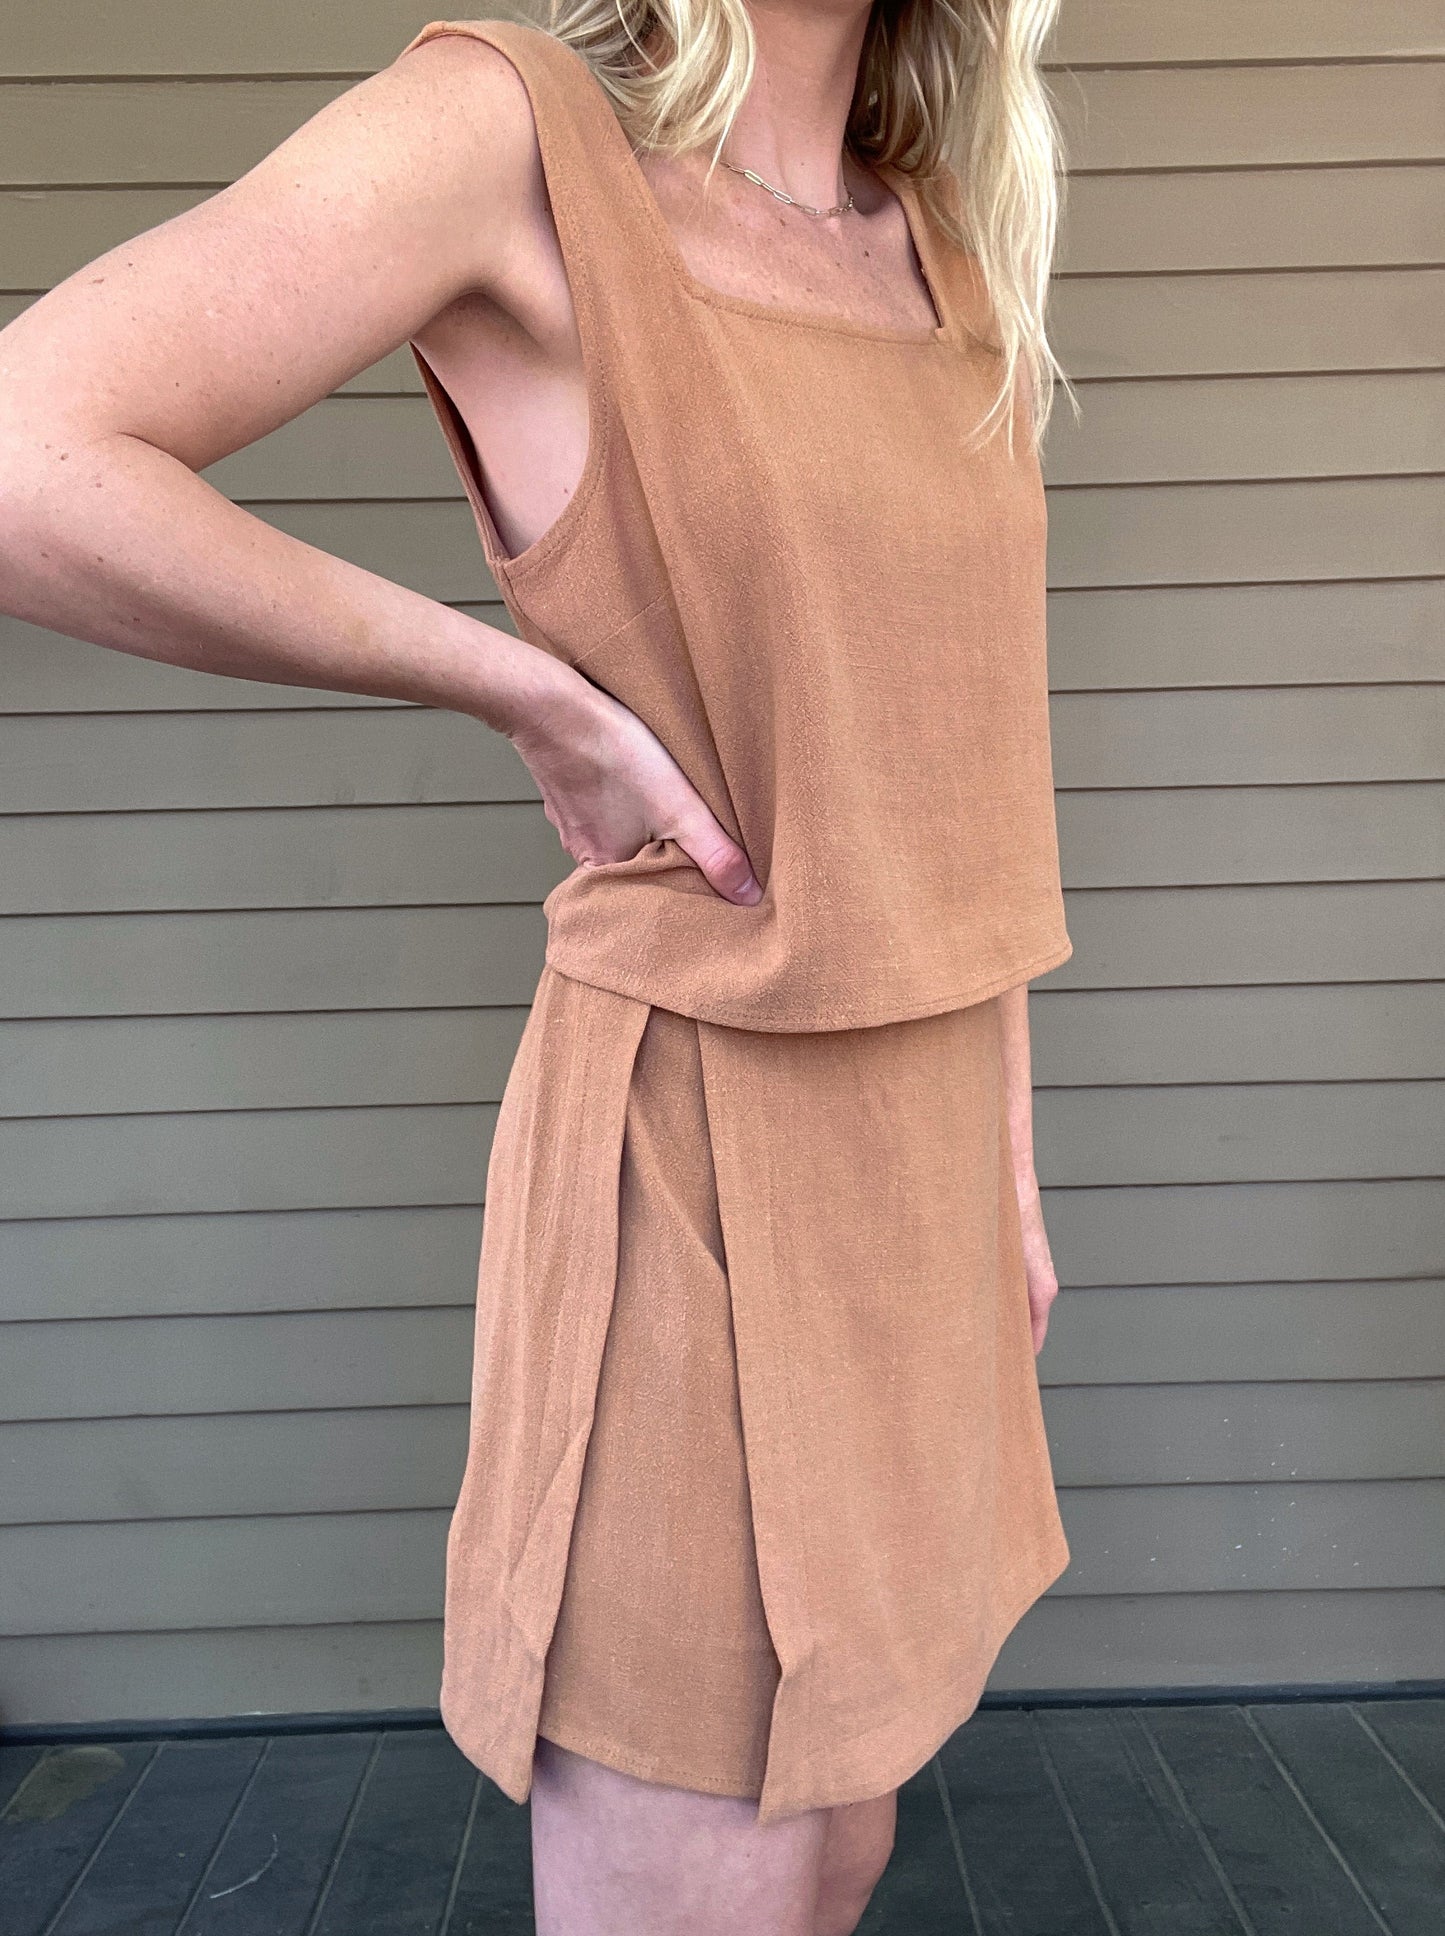 Out West Tank Top and Skirt Set  Tank top and skirt set Loose tank top Side button details on skirt Mini skirt 70% Rayon, 30% Linen Color: Tan